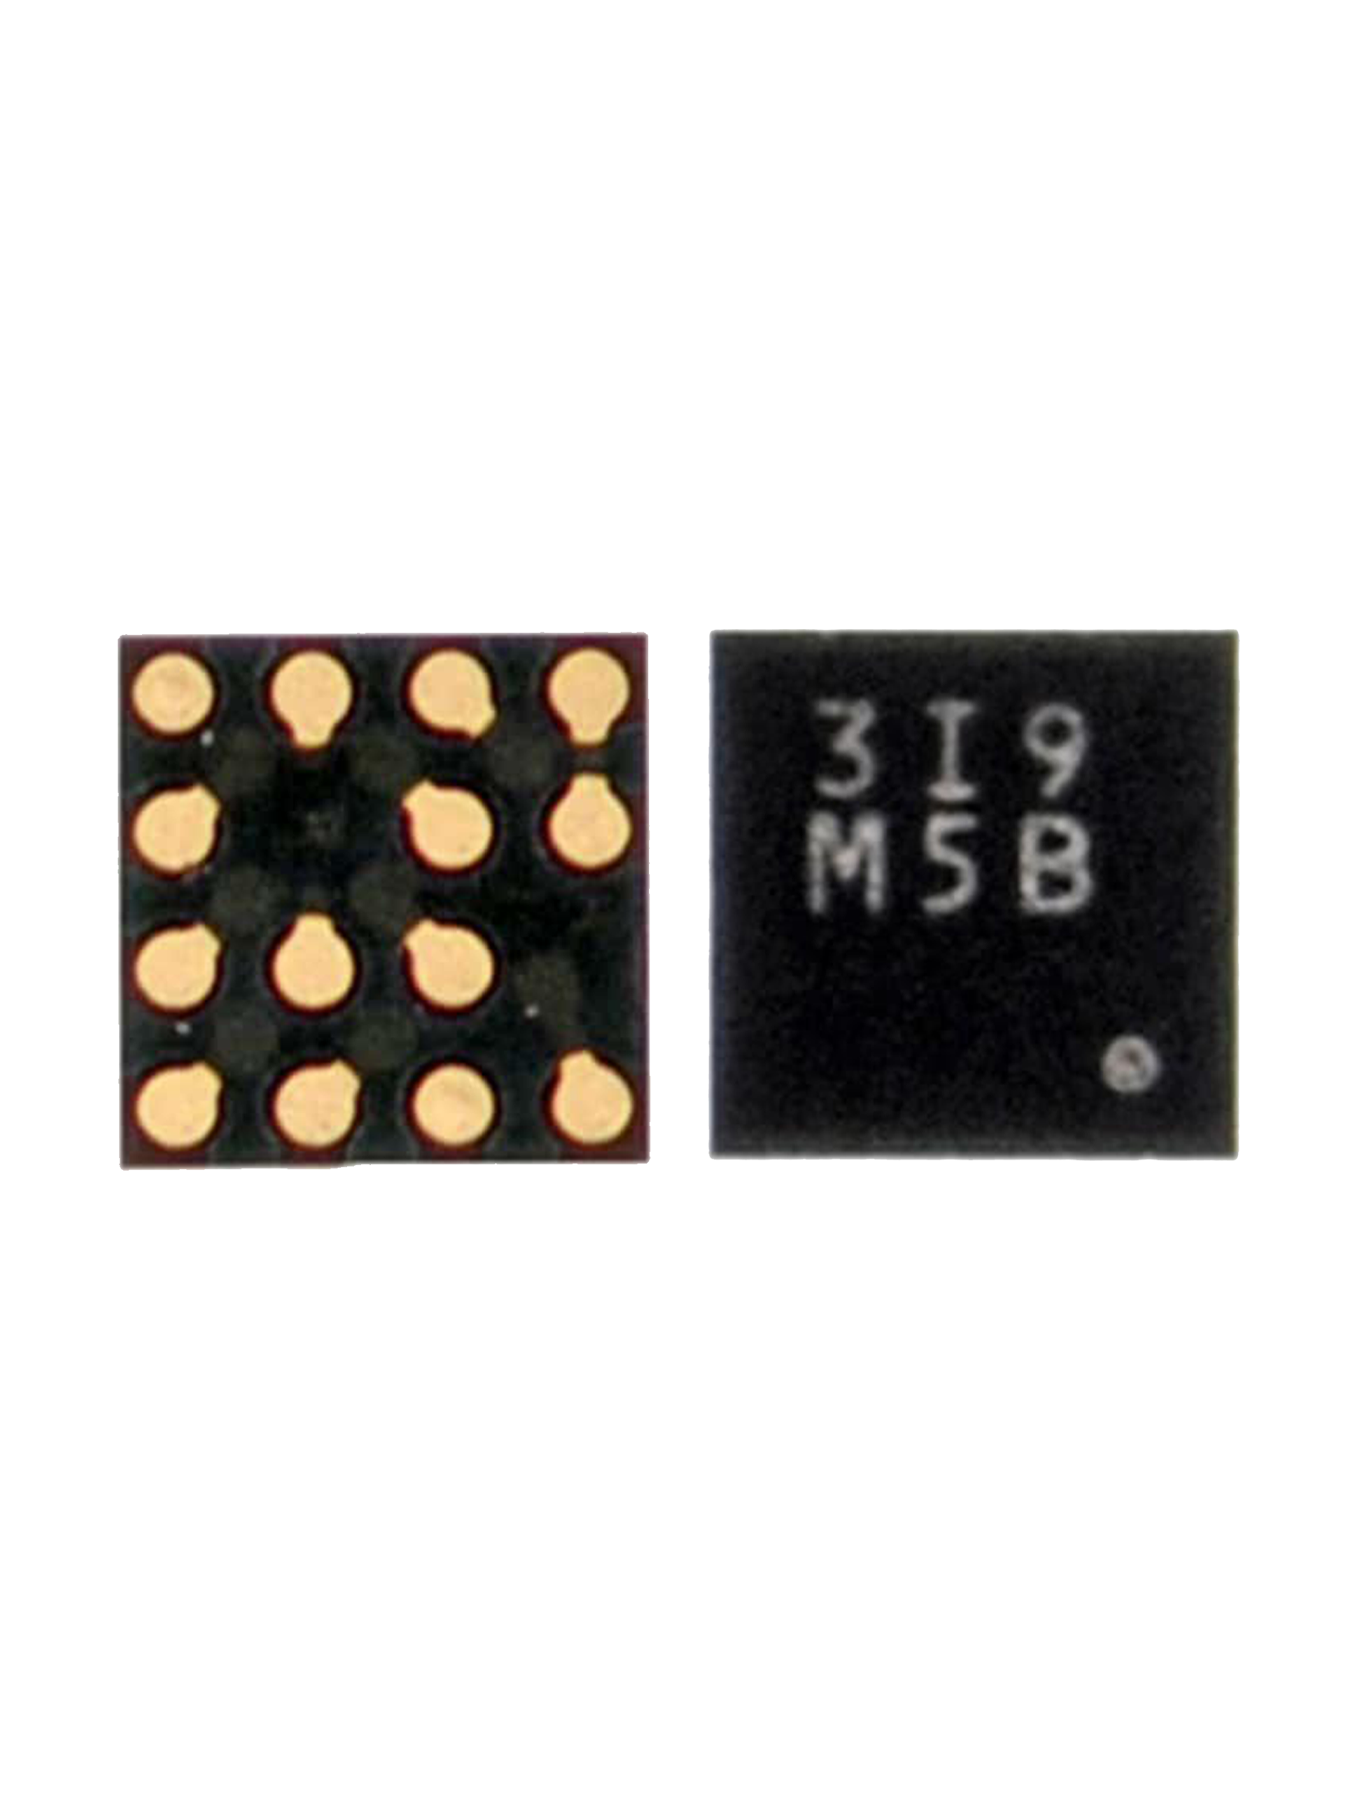 COMPASS CONTROLLER IC COMPATIBLE WITH IPHONE 6S / 6S PLUS / 7 / 7 PLUS / 8 / 8 PLUS (U3000 U2402 HSCDTD601A-19 14 PINS)